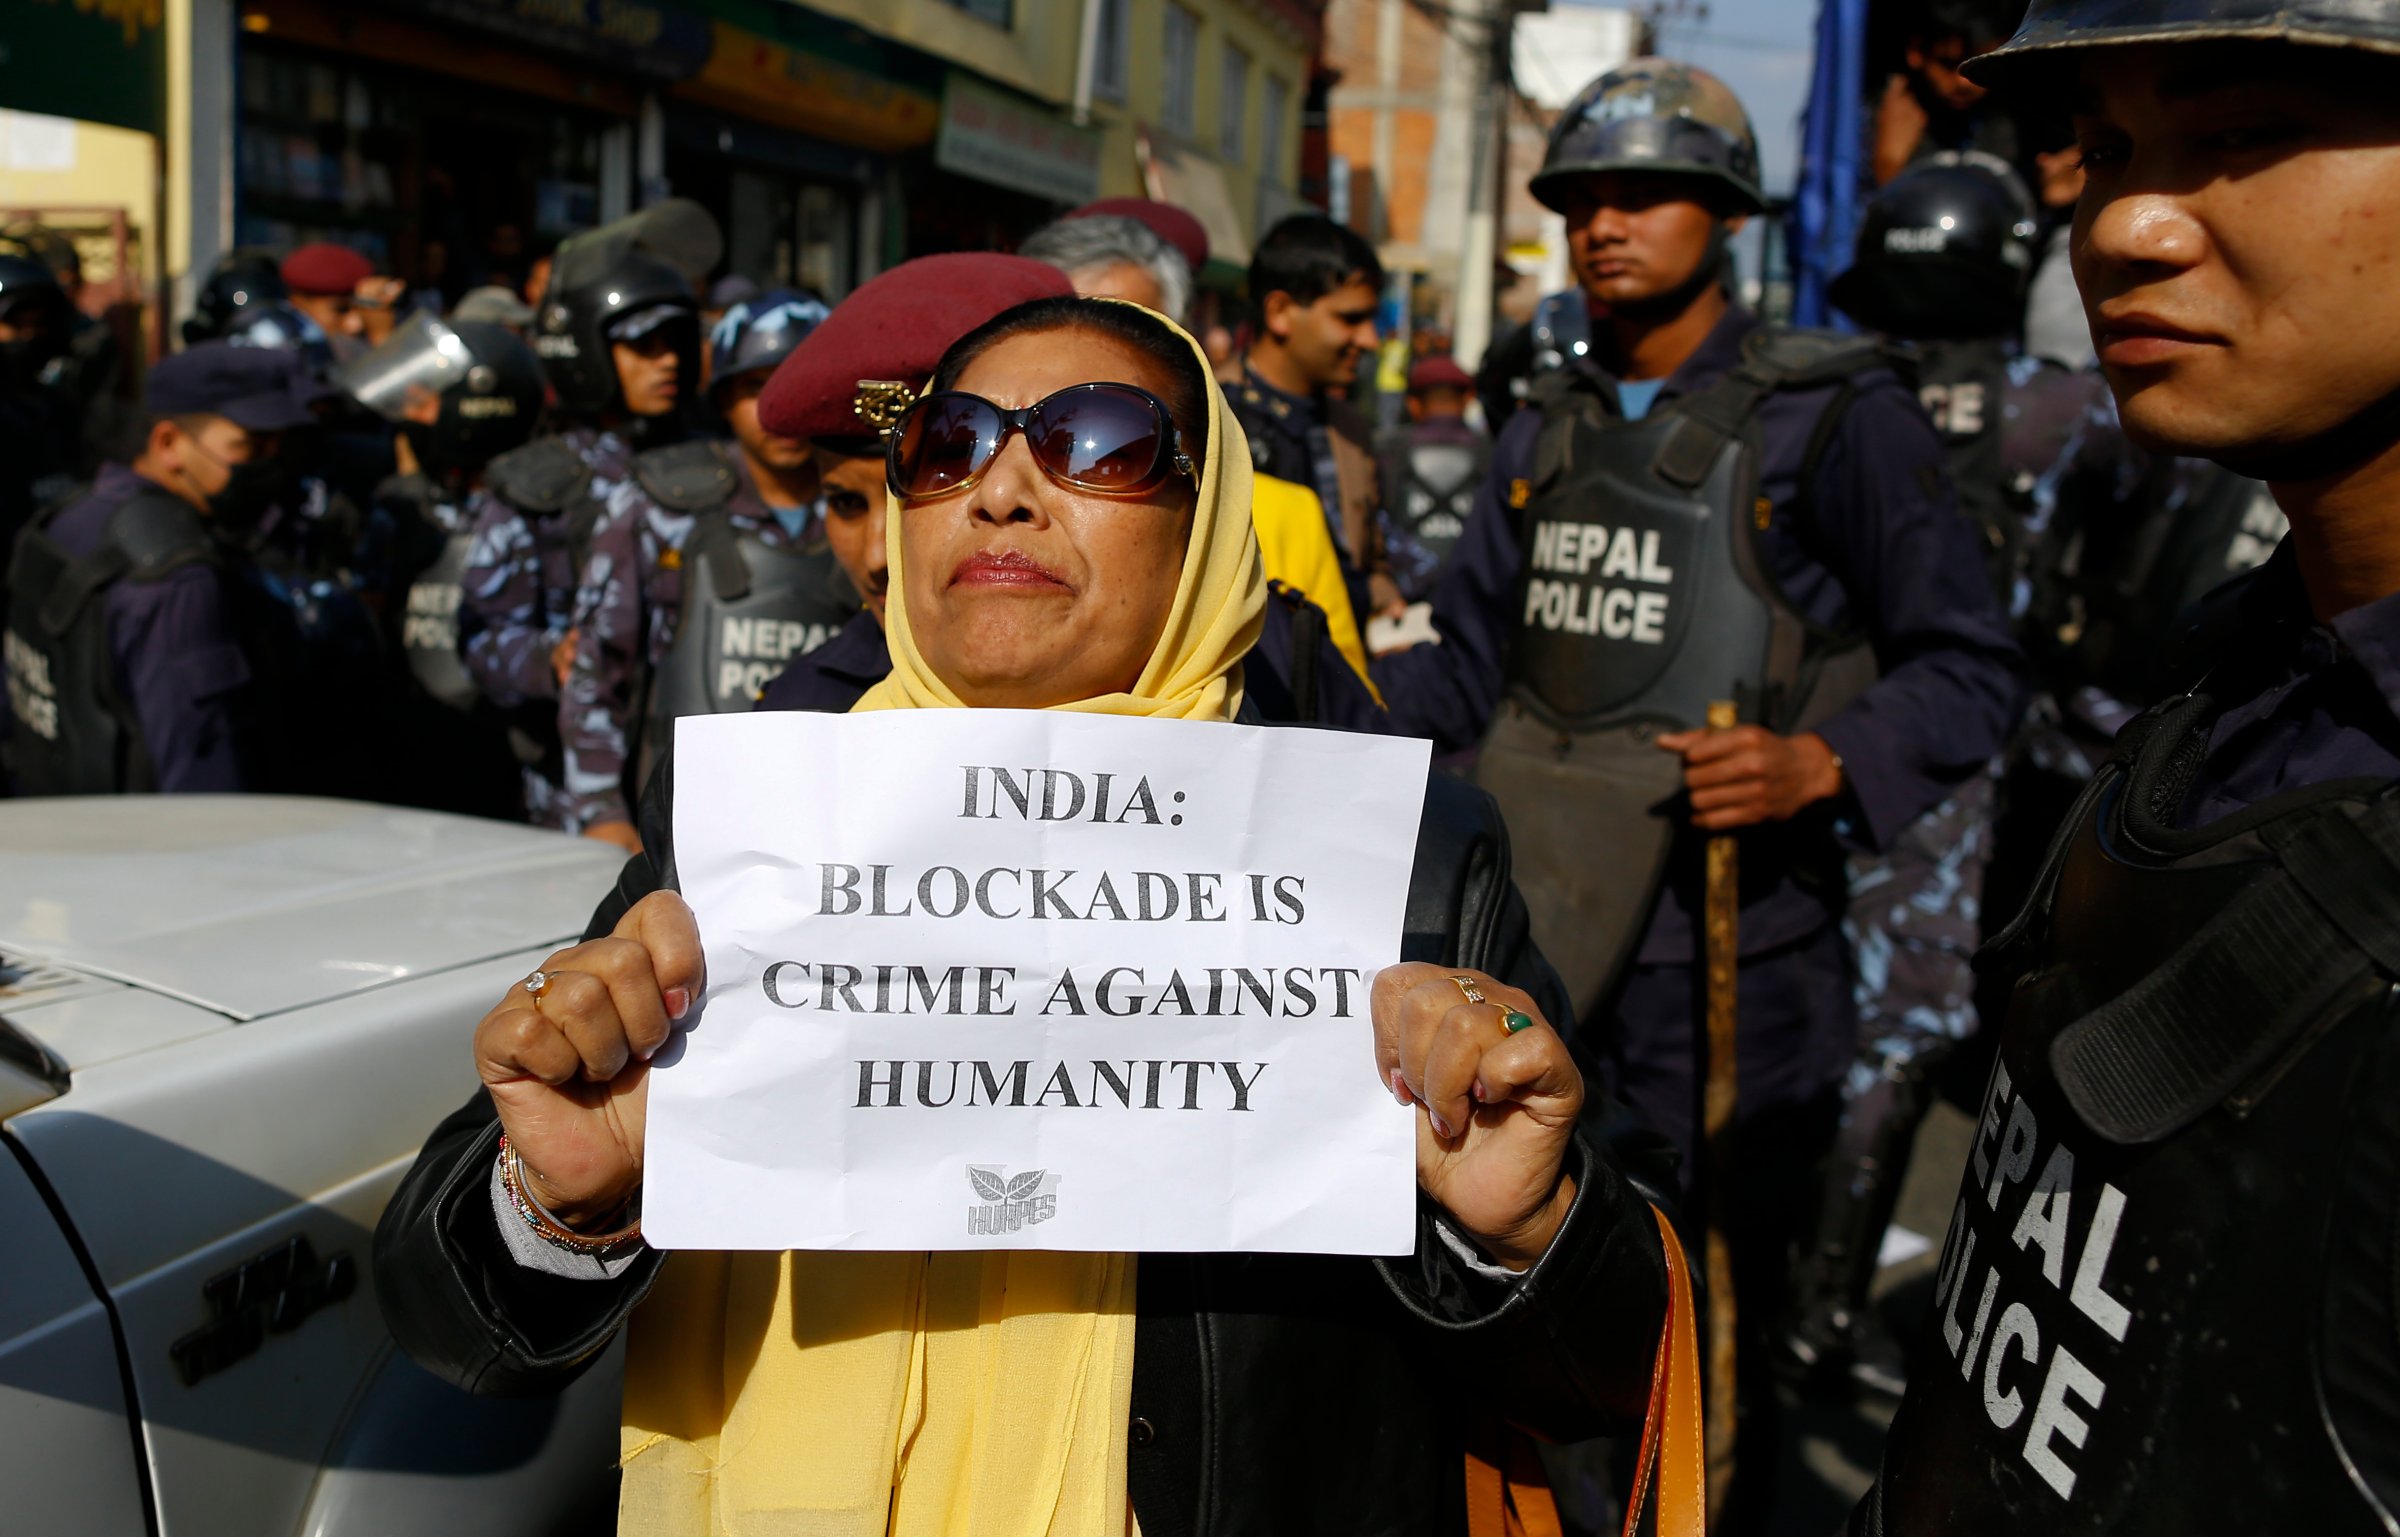 Protest rally in front of the Indian Embassy in Kathmandu